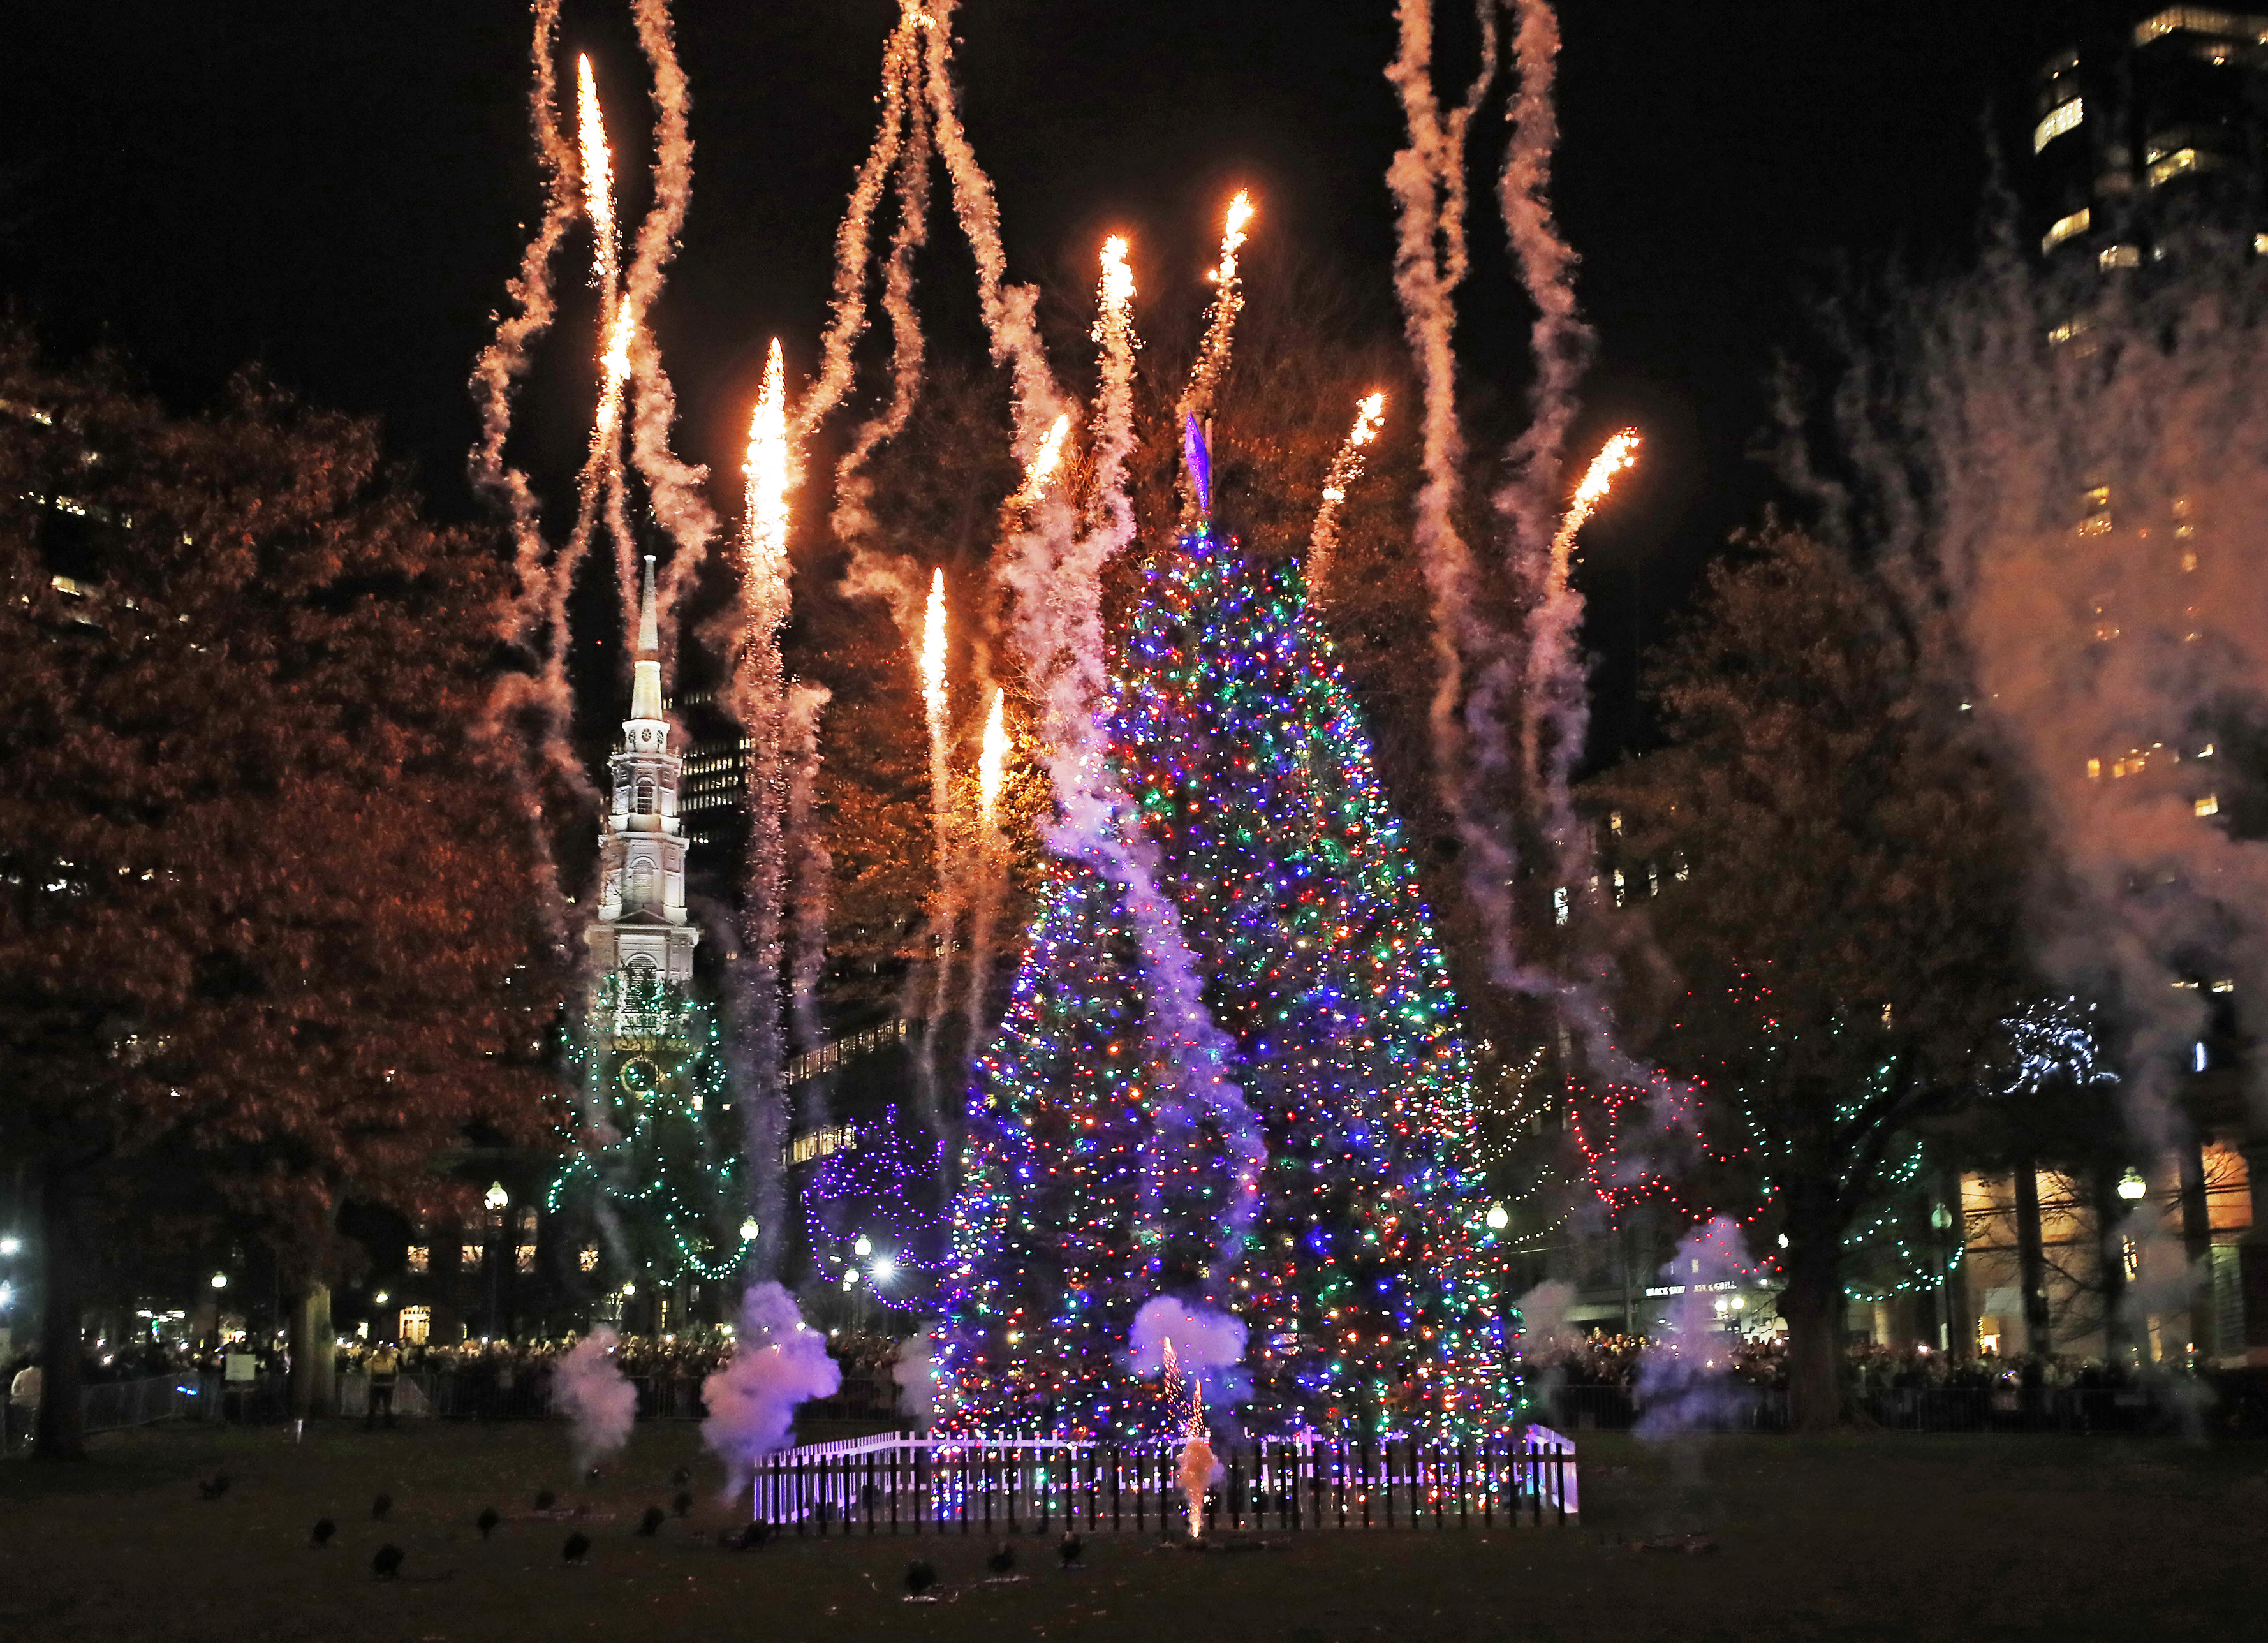 The 80th annual Christmas tree lighting event was held on the Boston Common on December 2, 2021. As it was lit, the tree was surrounded by fireworks at the conclusion of the event.